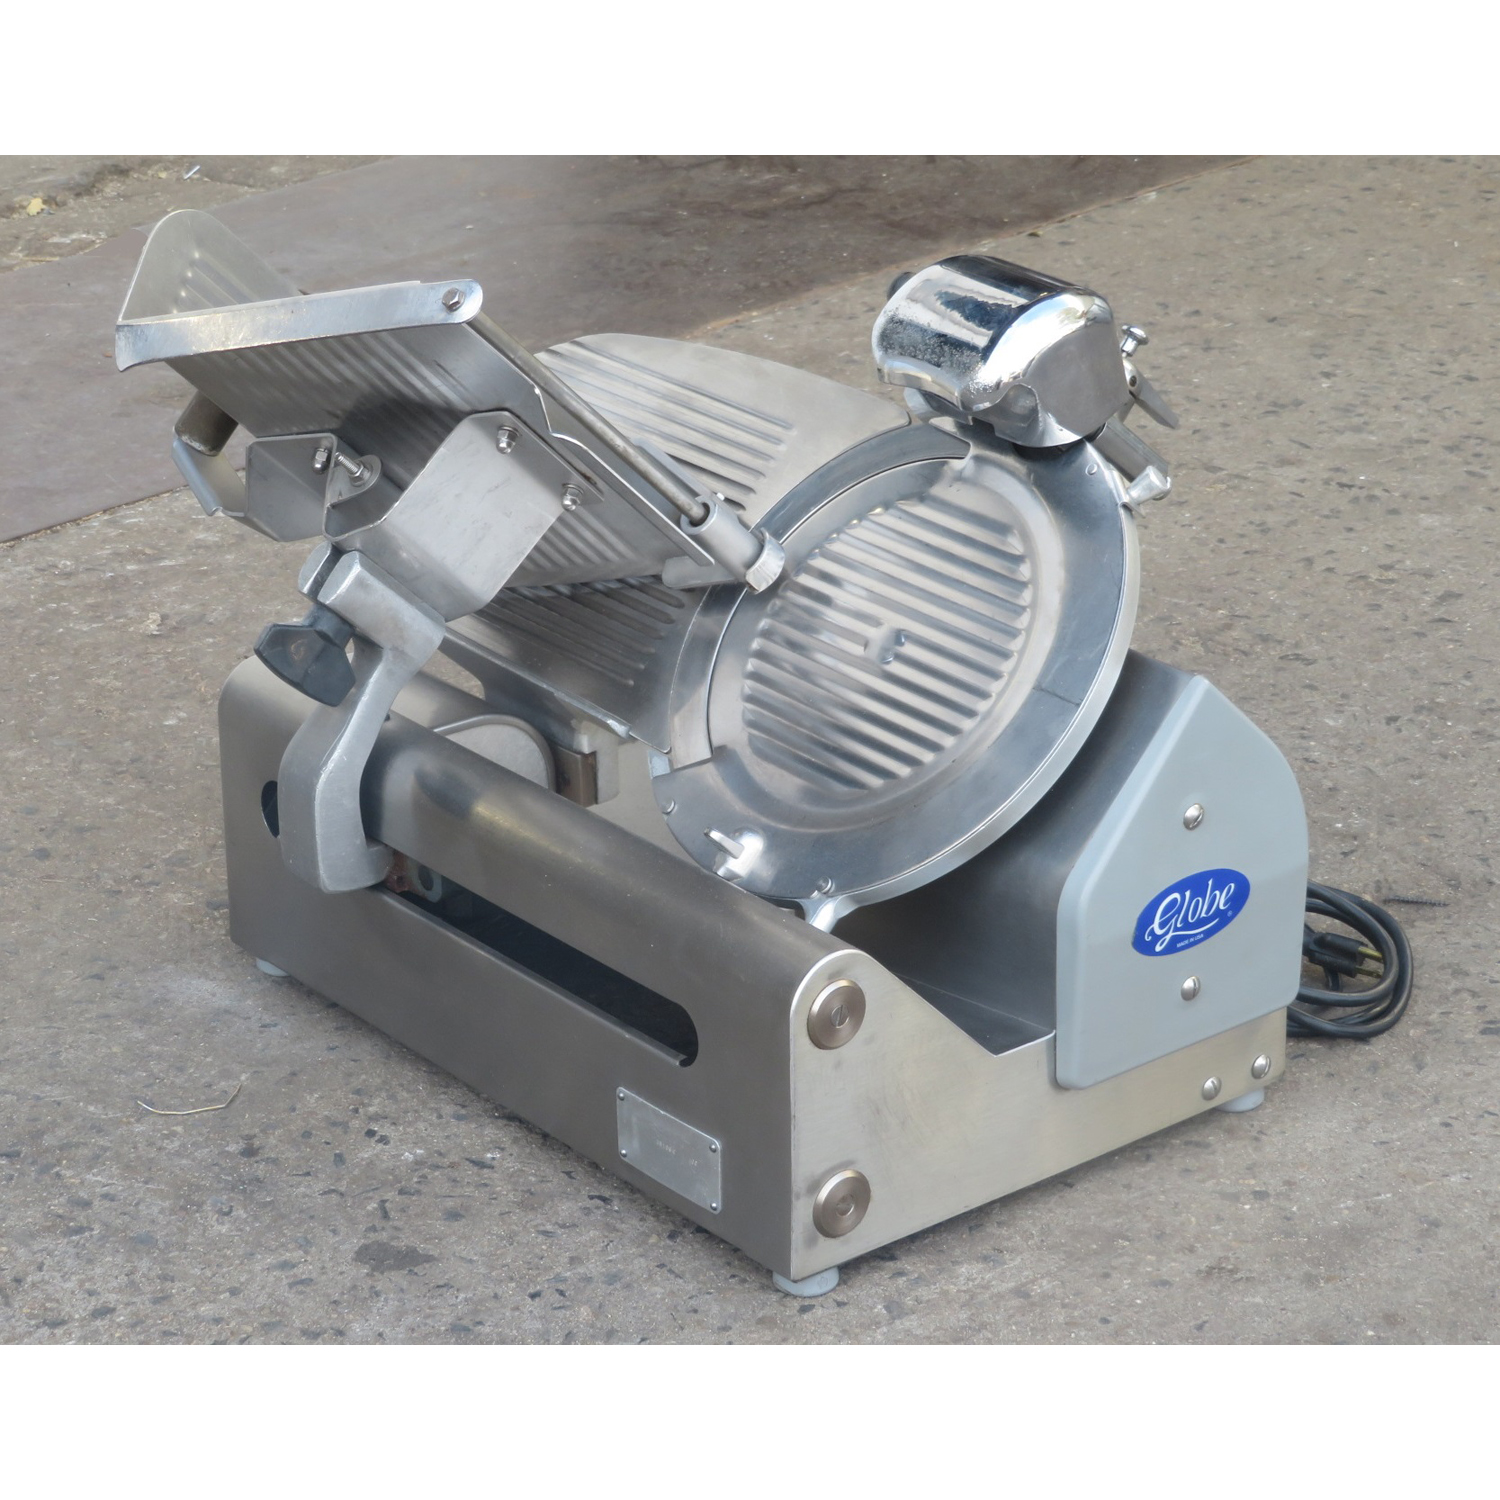 Globe 3600 Meat Slicer, Used Excellent Condition image 1